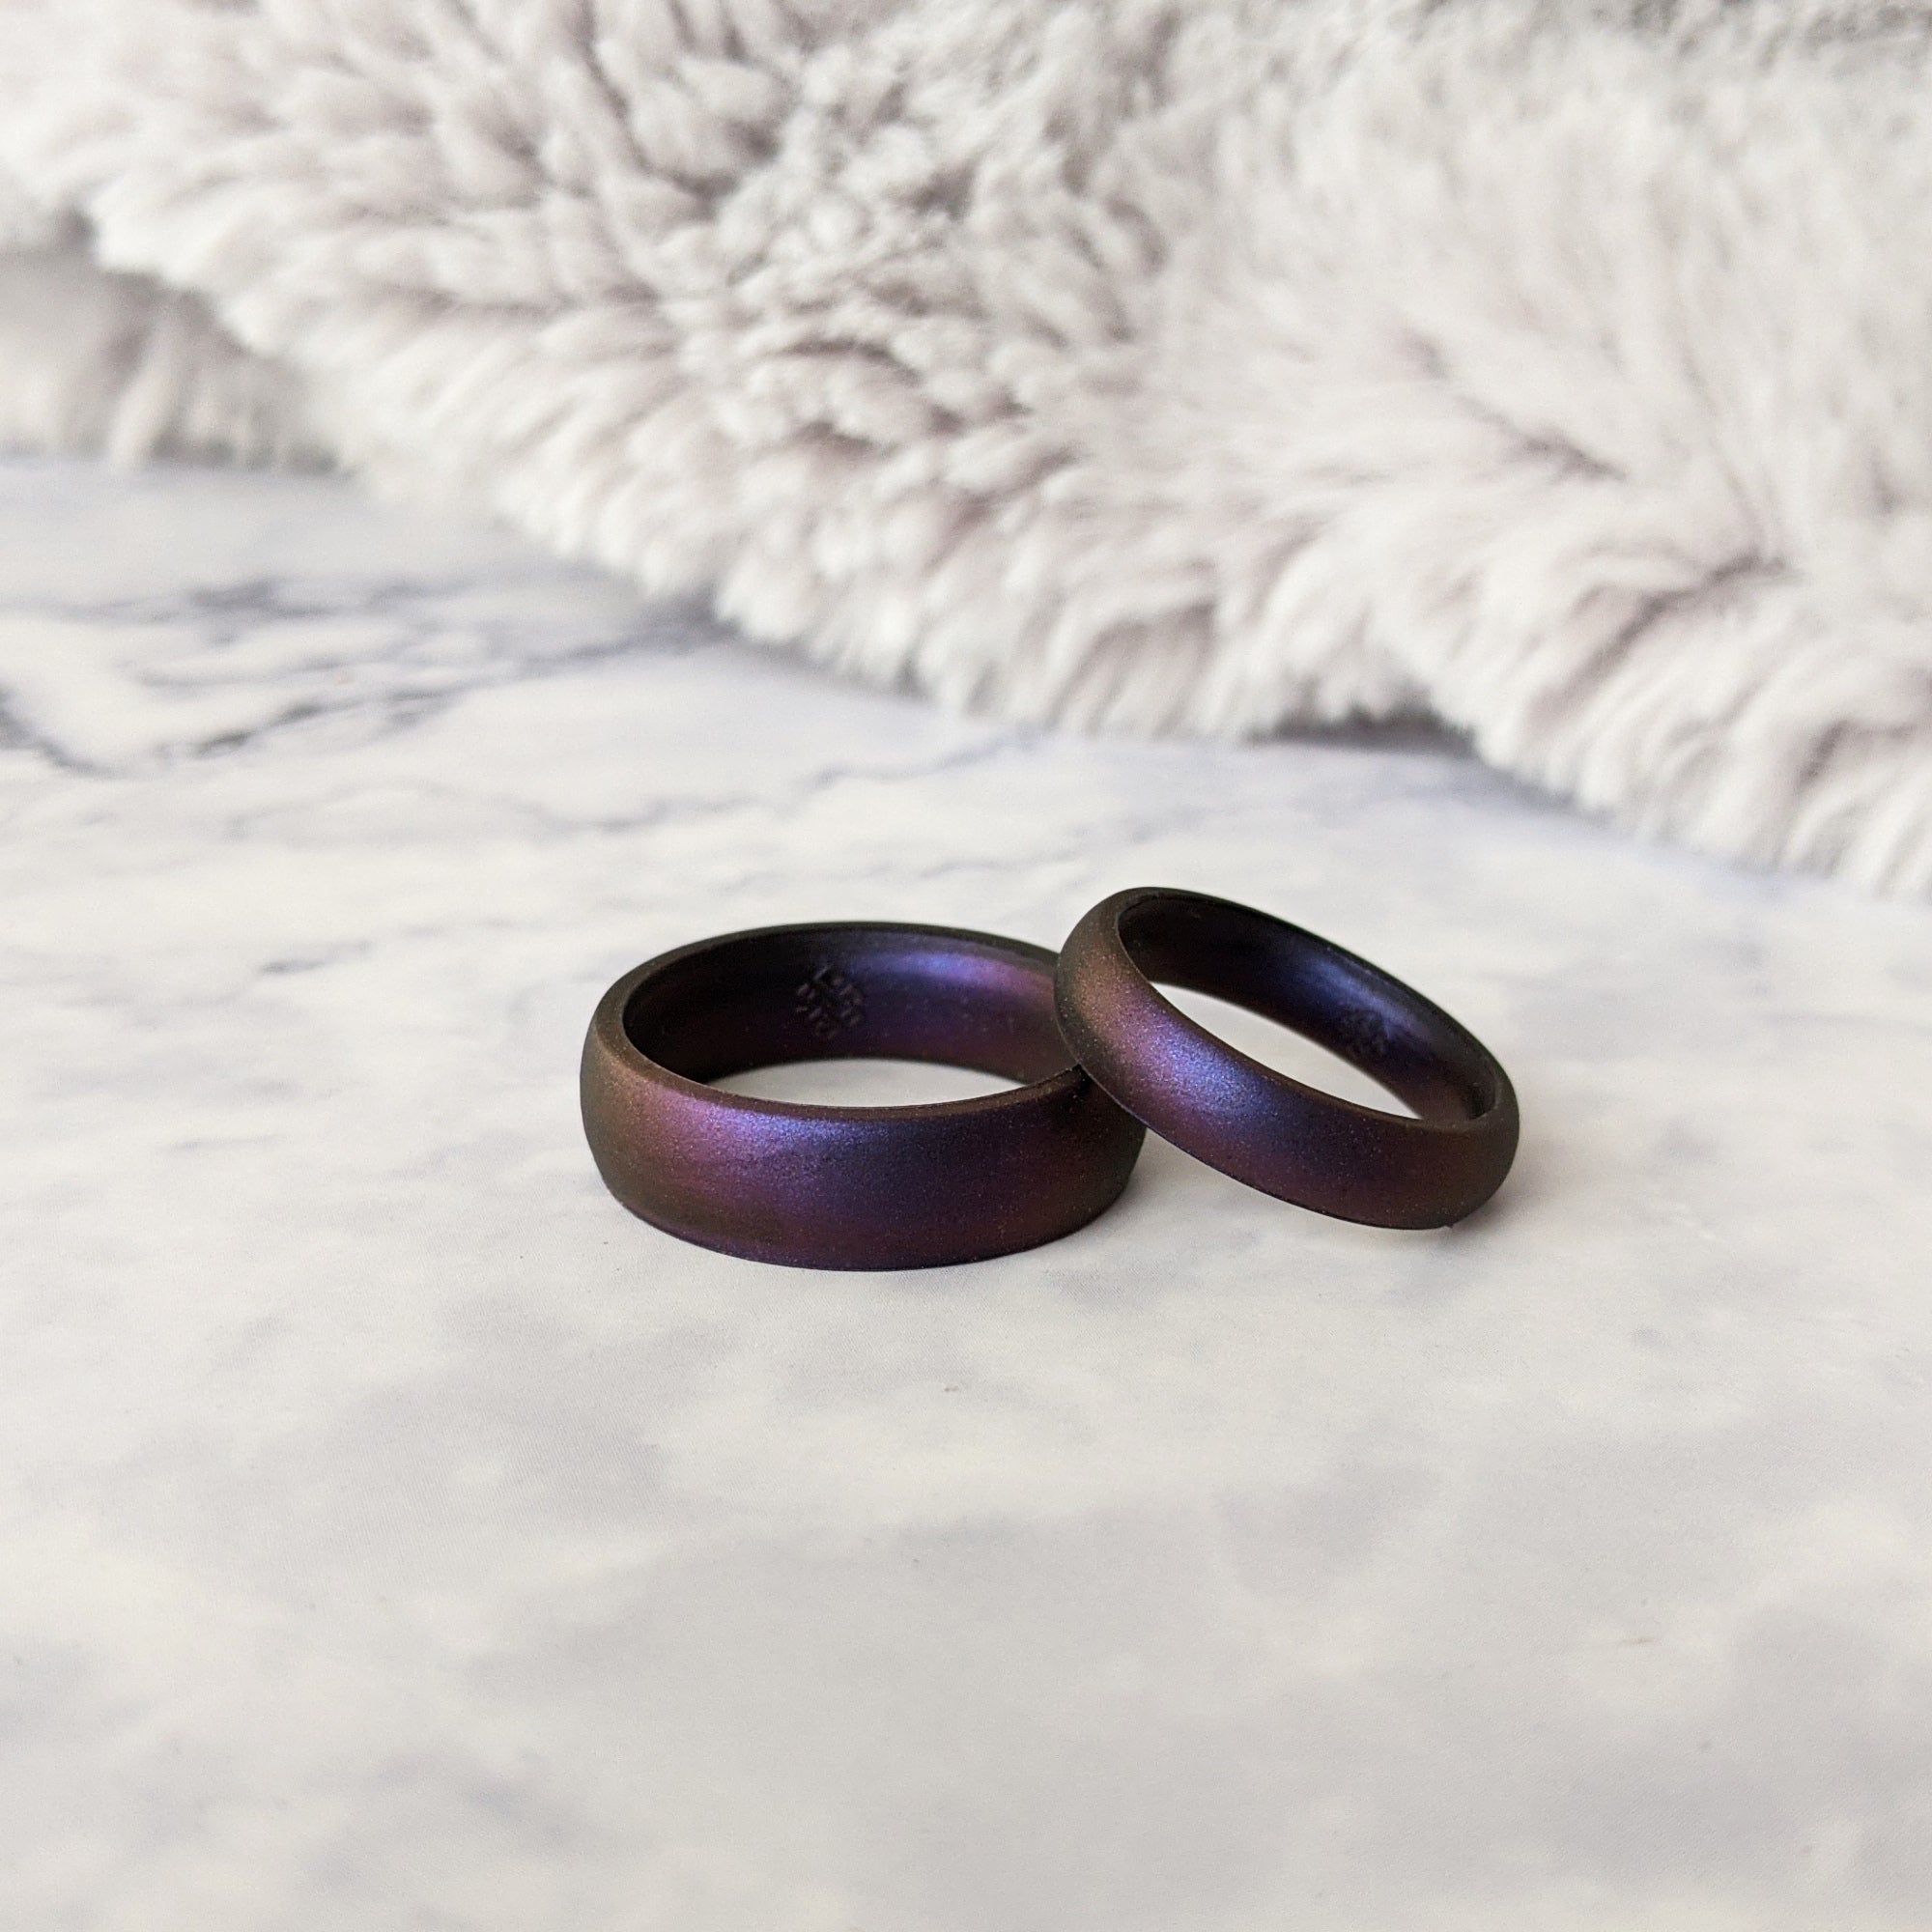 Cosmic Purple Breathable Silicone Ring for Women and Men - Knot Theory